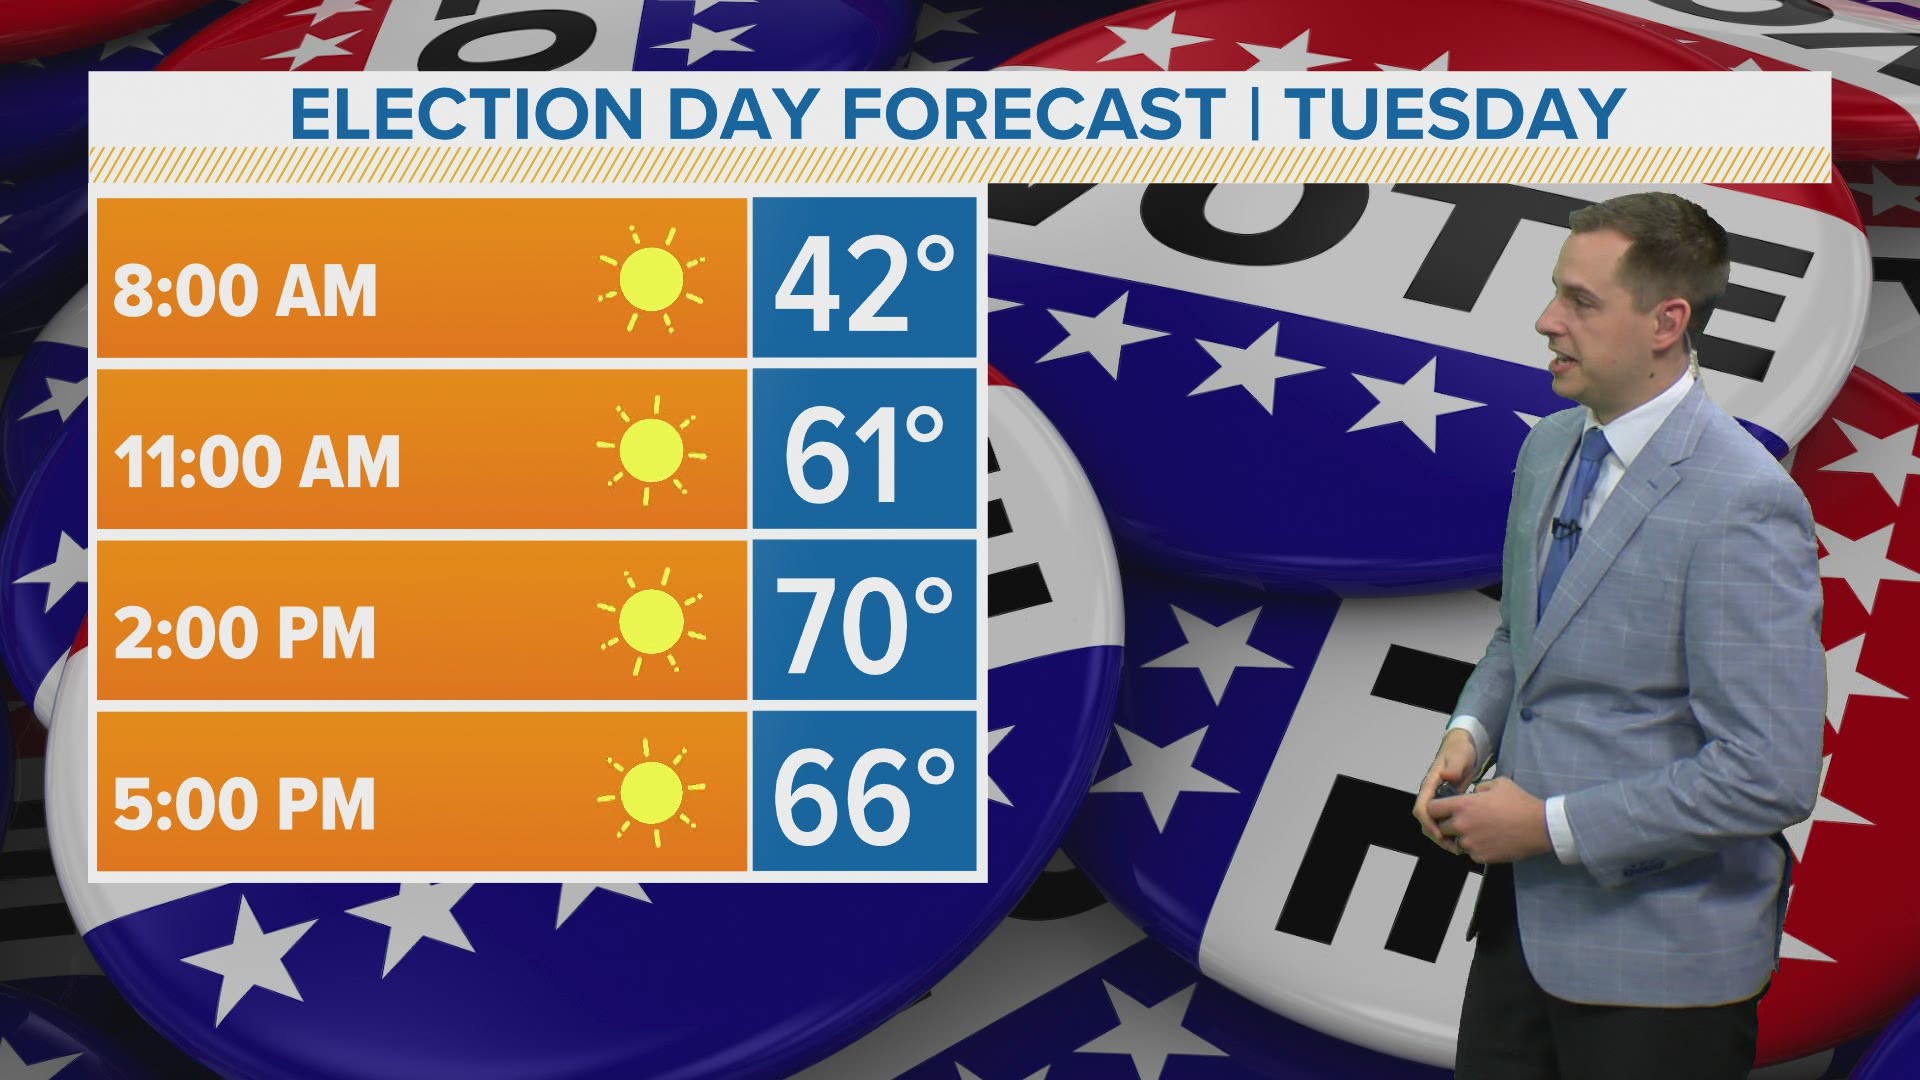 Election Day is on track to be one of the warmest presidential elections on record in Iowa.